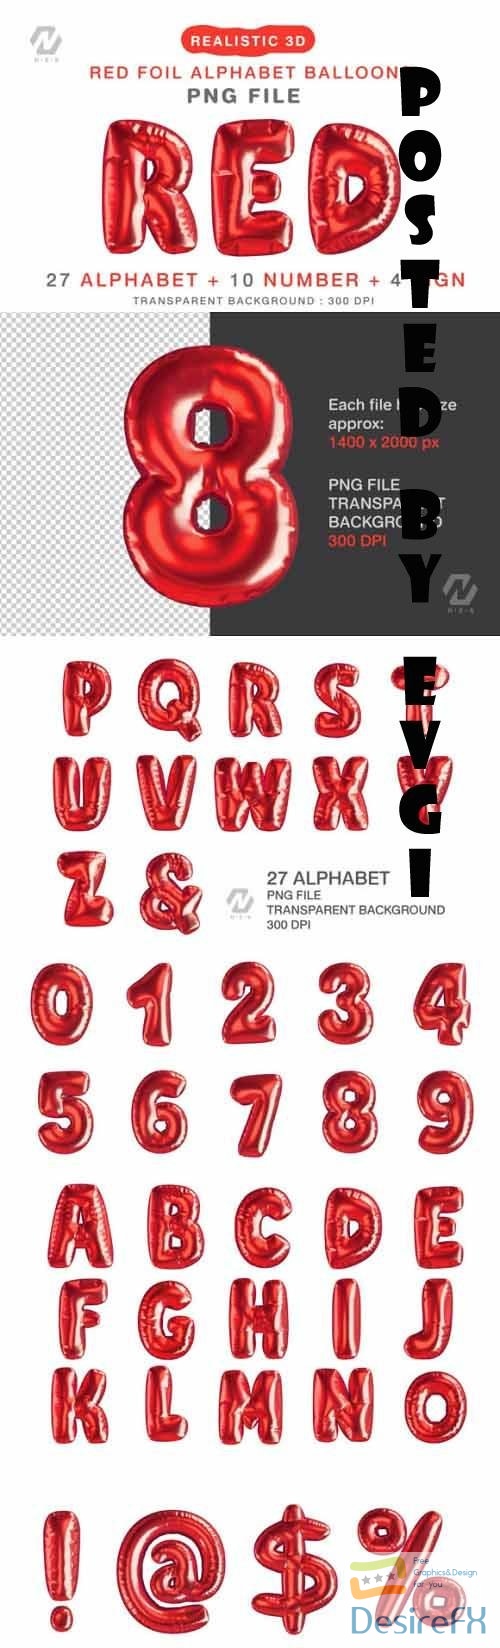 Red Foil Alphabet Balloon Realistic PNG